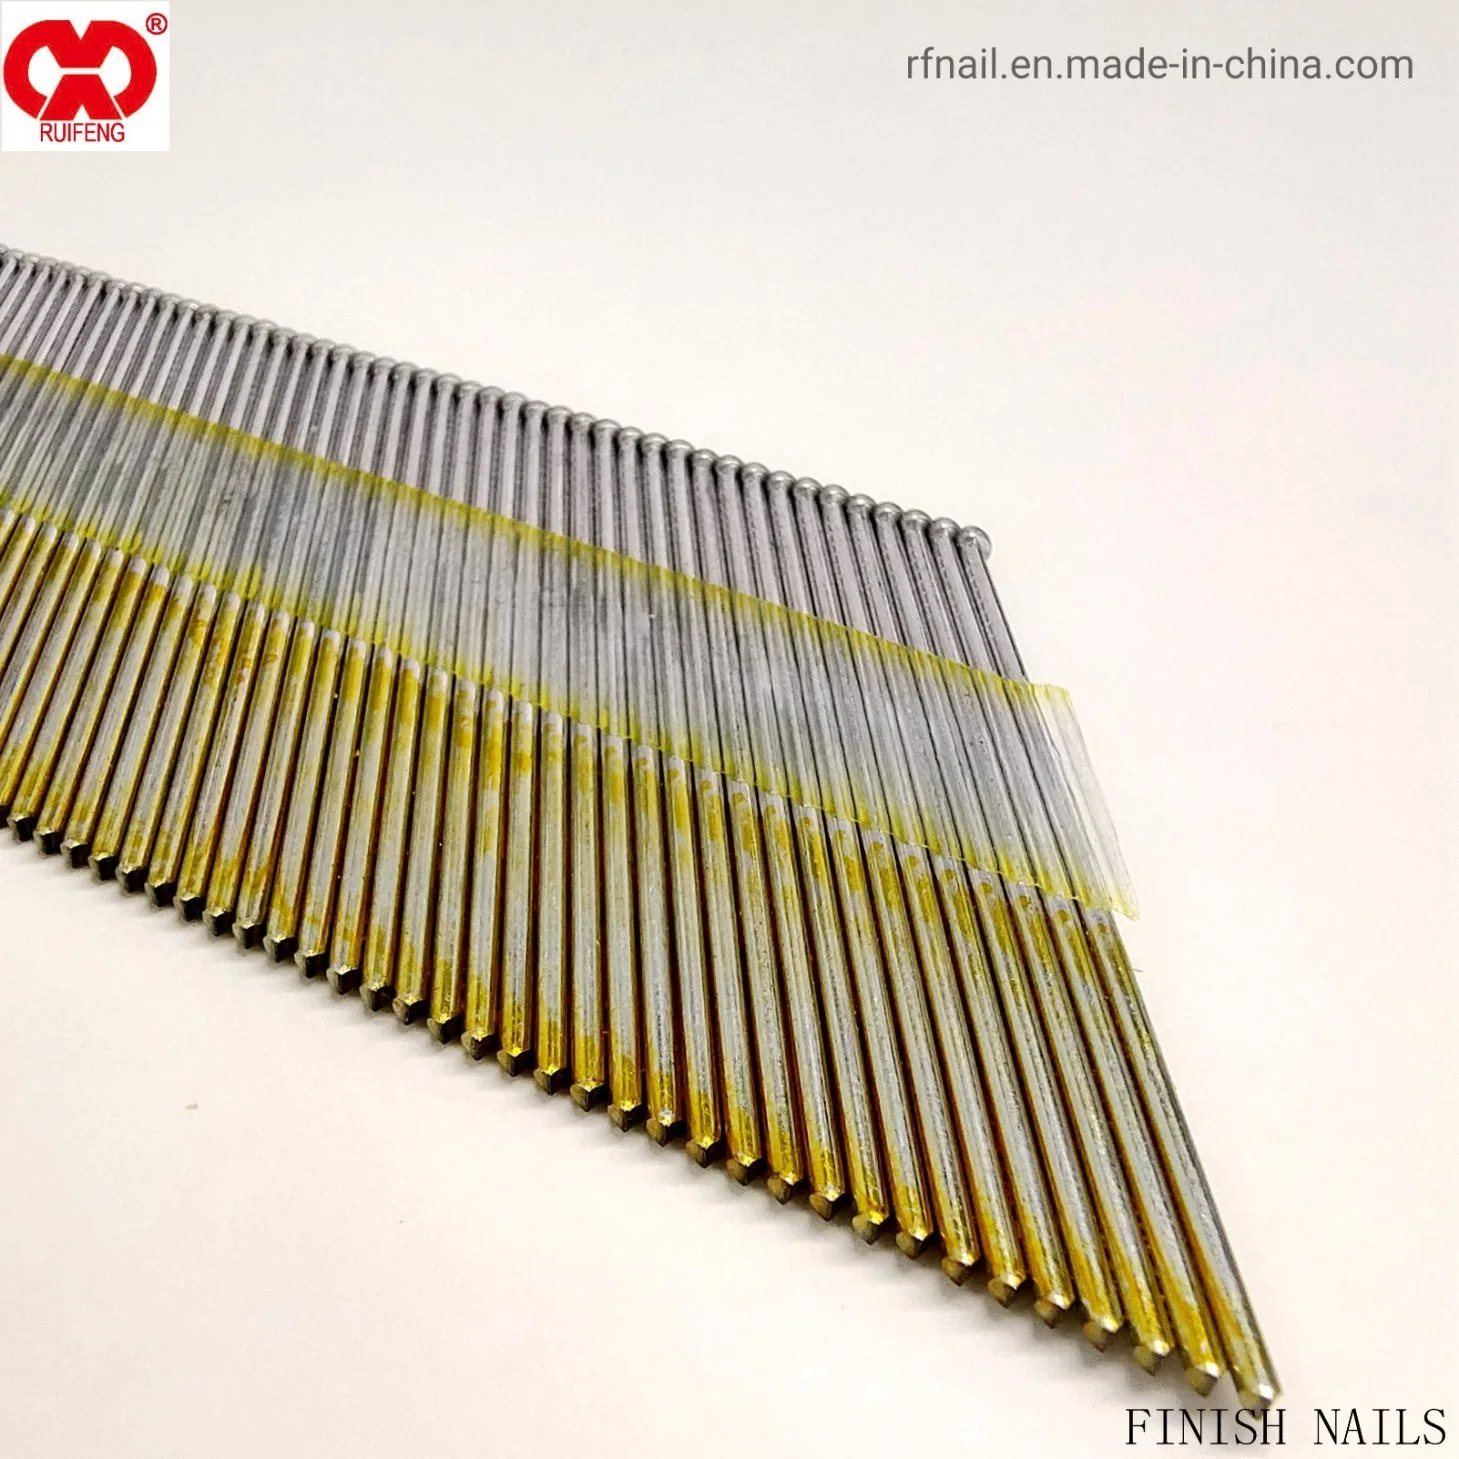 Direct Manufacturer in Anhui Galvanized Nails Factory Supplier Competitive Price Steel Galvanized 15ga Finish Nail - Da Nails.